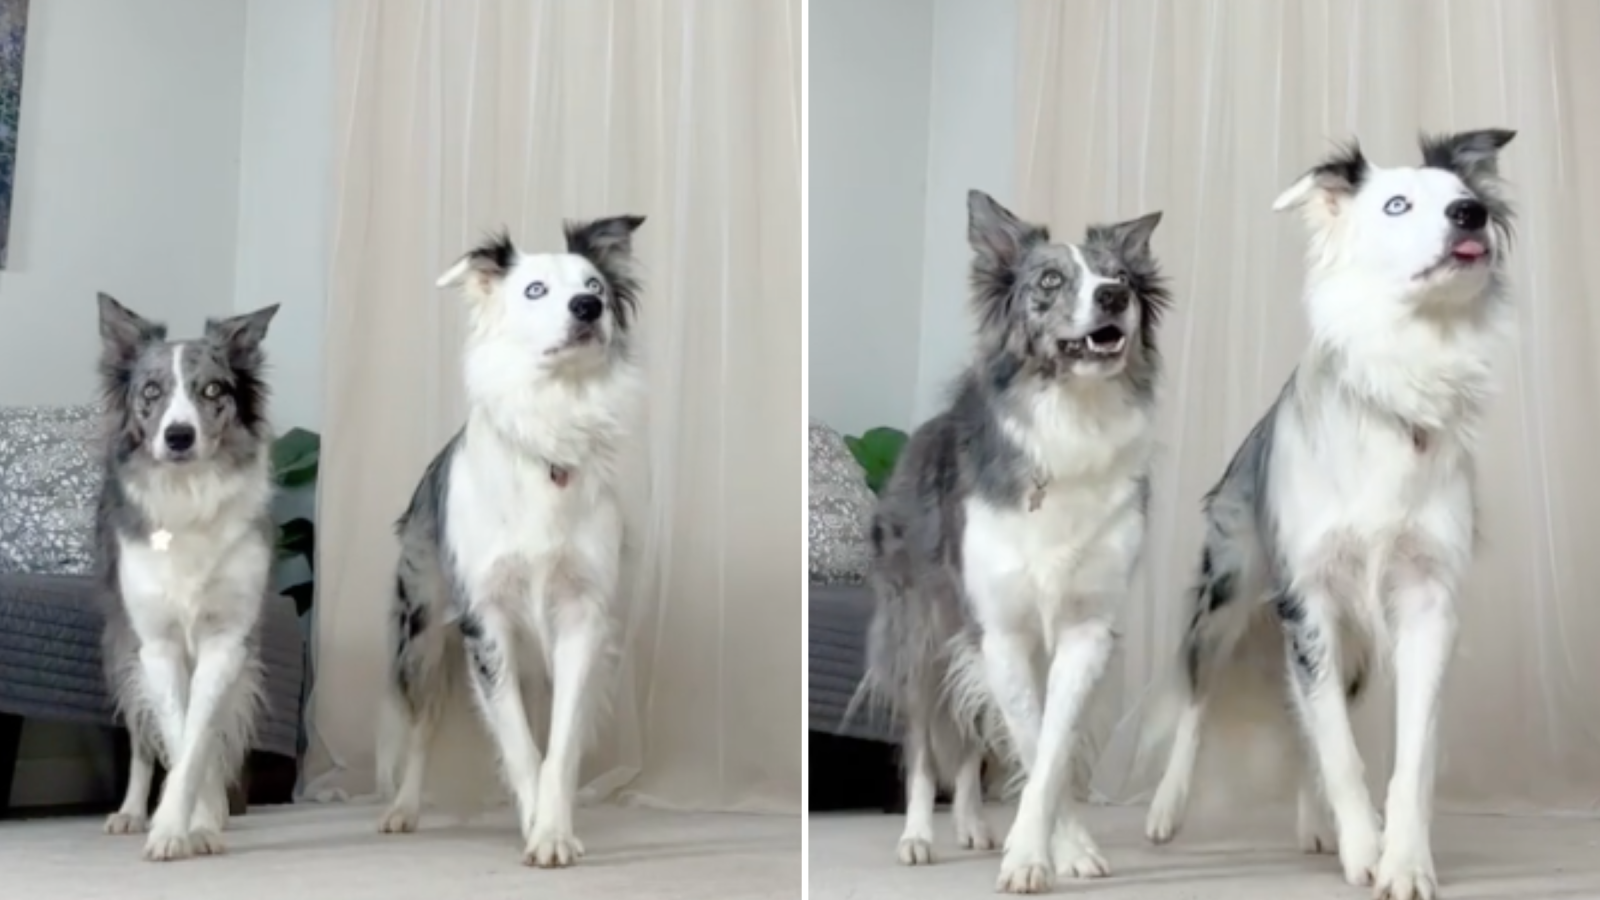 Watch Border Collies' Perfectly Timed Dance to Michael Jackson's 'Thriller